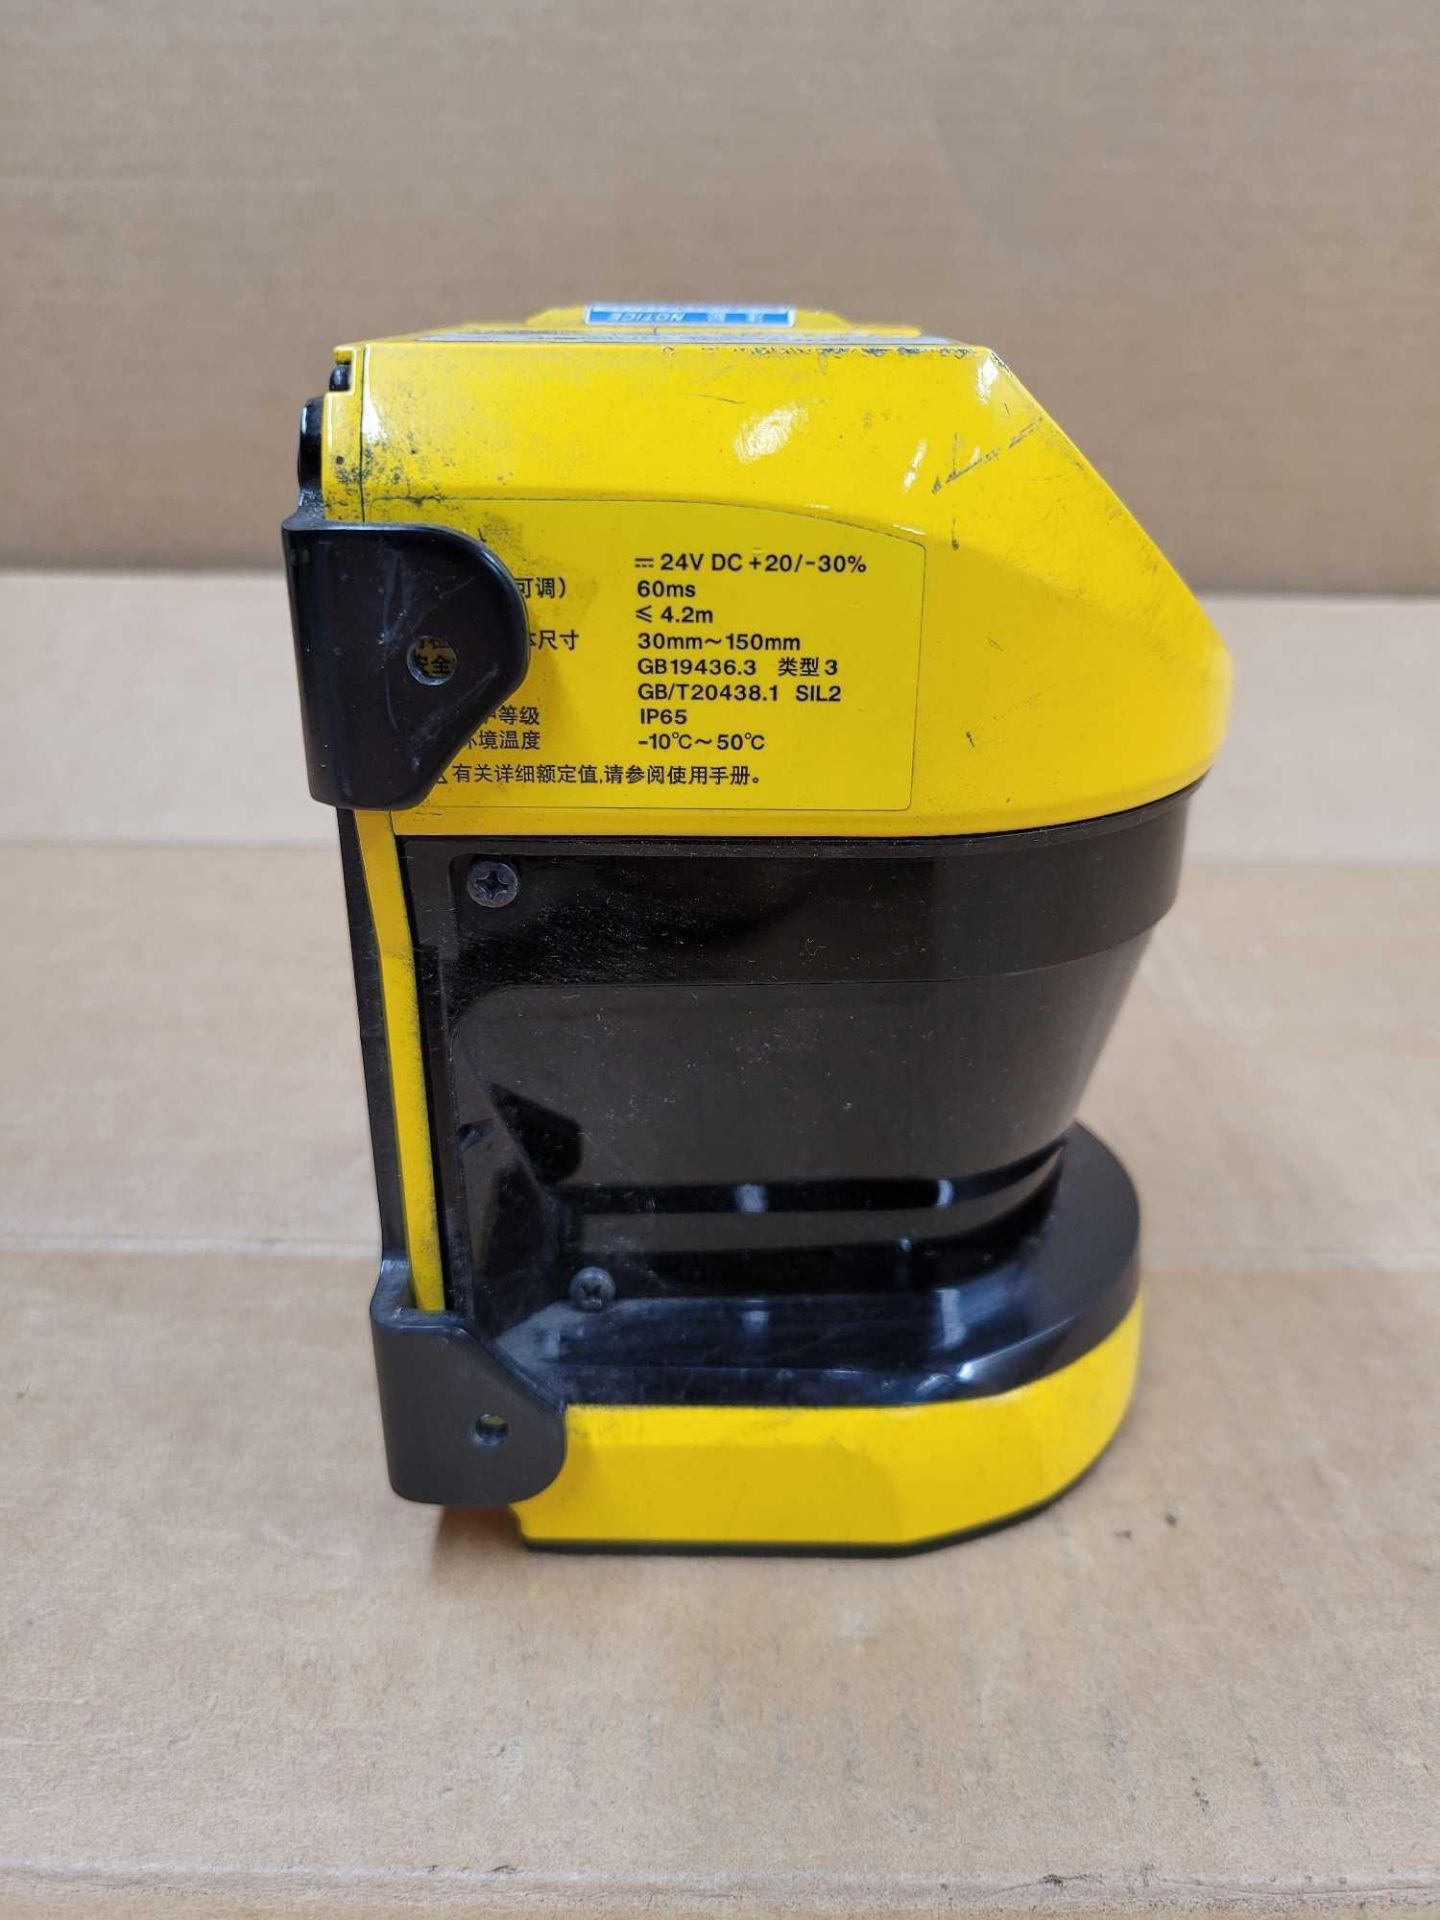 KEYENCE SZ-16V / Safety Laser Scanner  /  Lot Weight: 4.2 lbs - Image 3 of 7